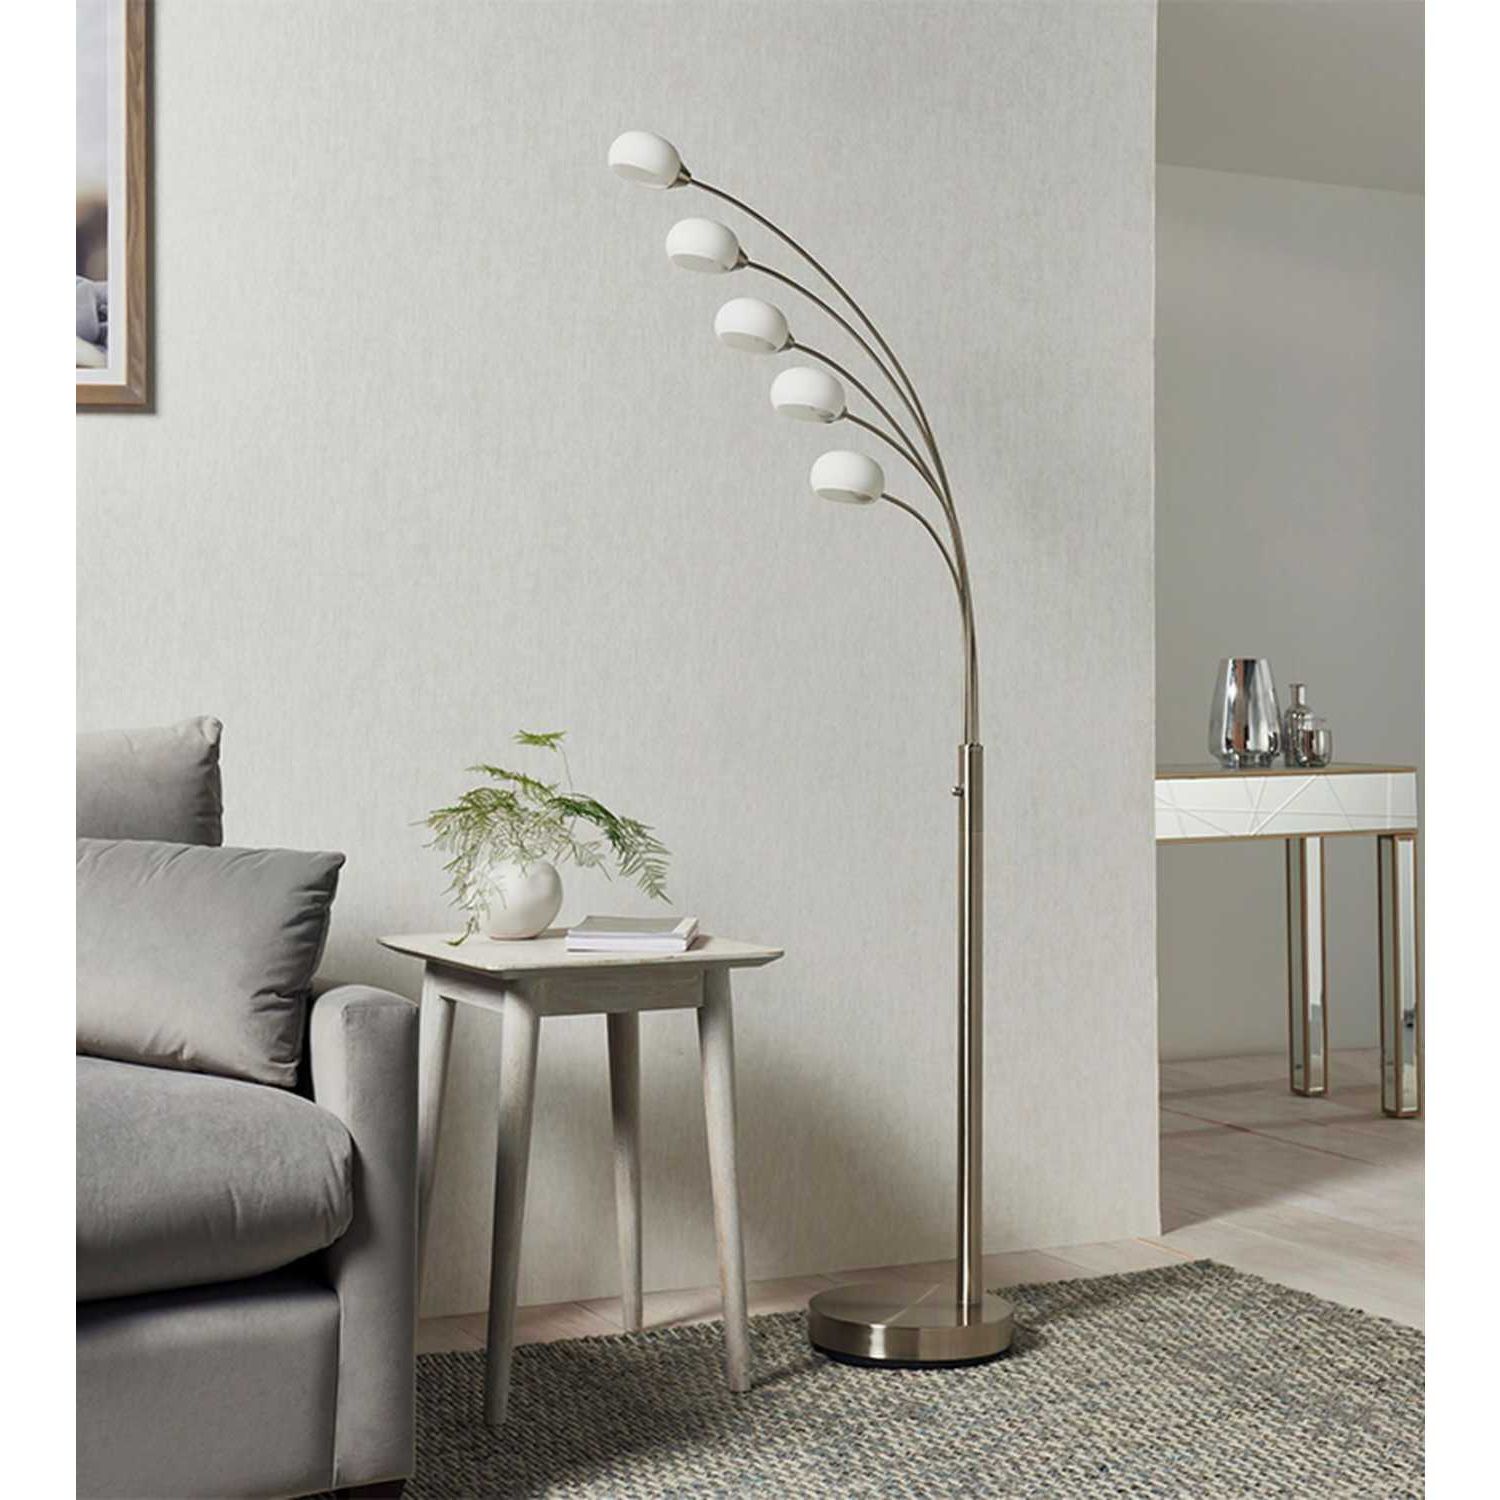 Vintage Silver Steel 5 Arm Dimmable Floor Lamp In Satin Nickel Finish With  White Glass – Cms Furniture For Glass Satin Nickel Floor Lamps (View 12 of 20)